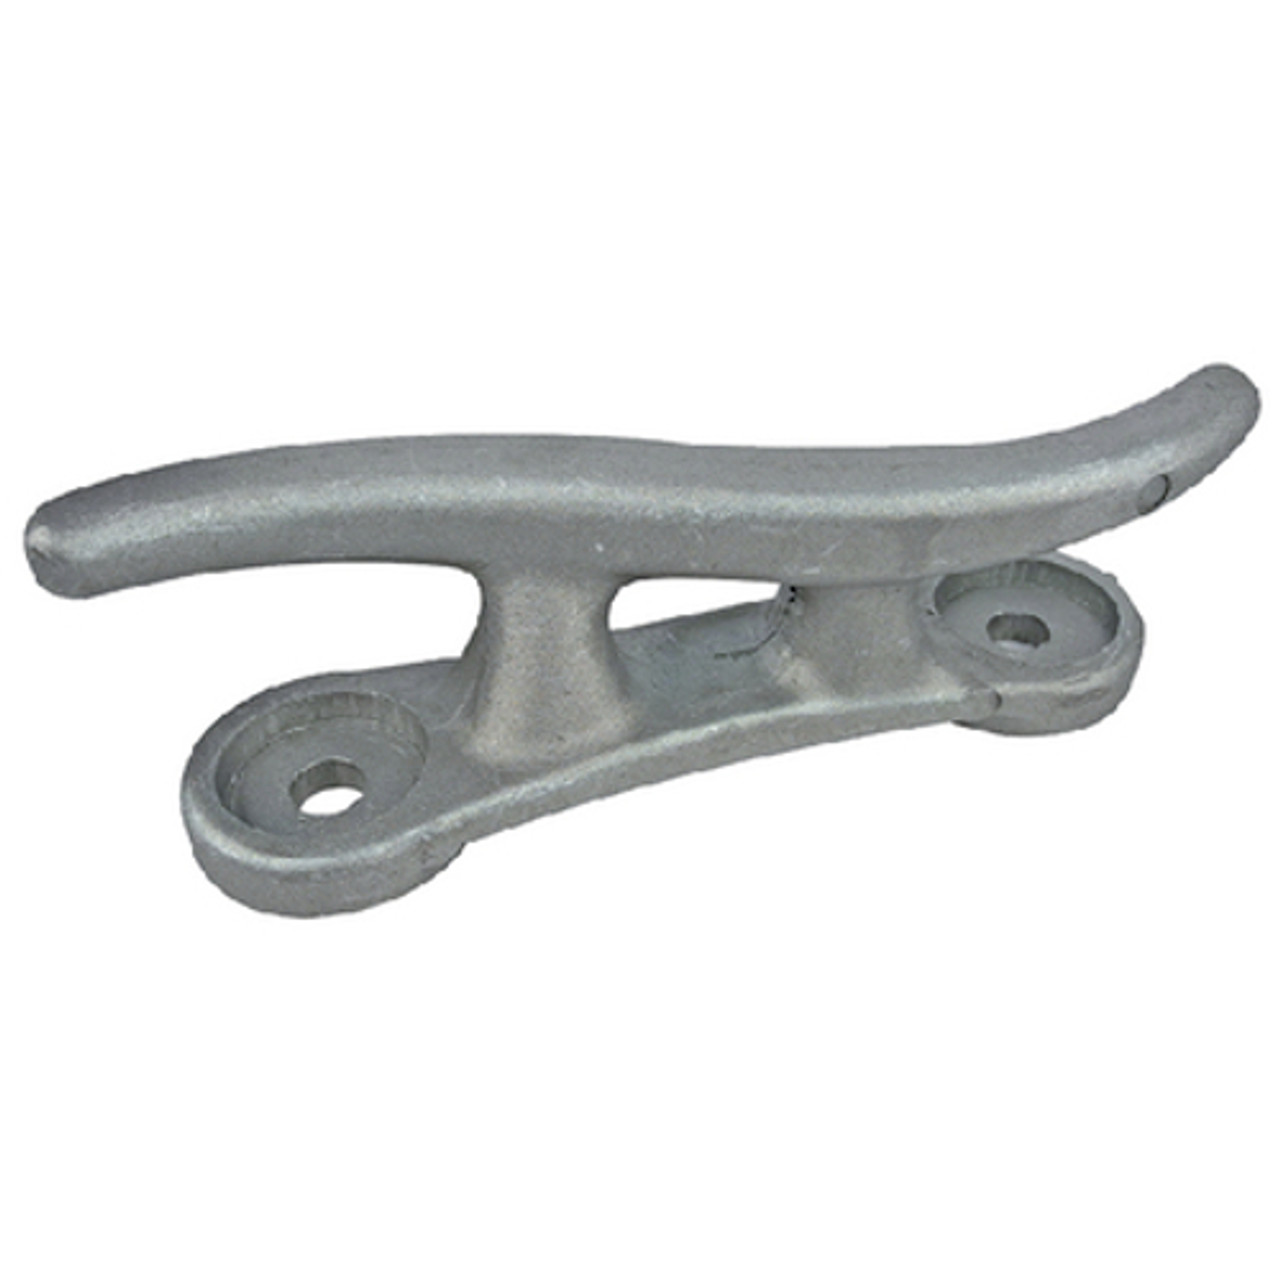 15 Inch Cast Aluminum S Cleat for Boats and Docks